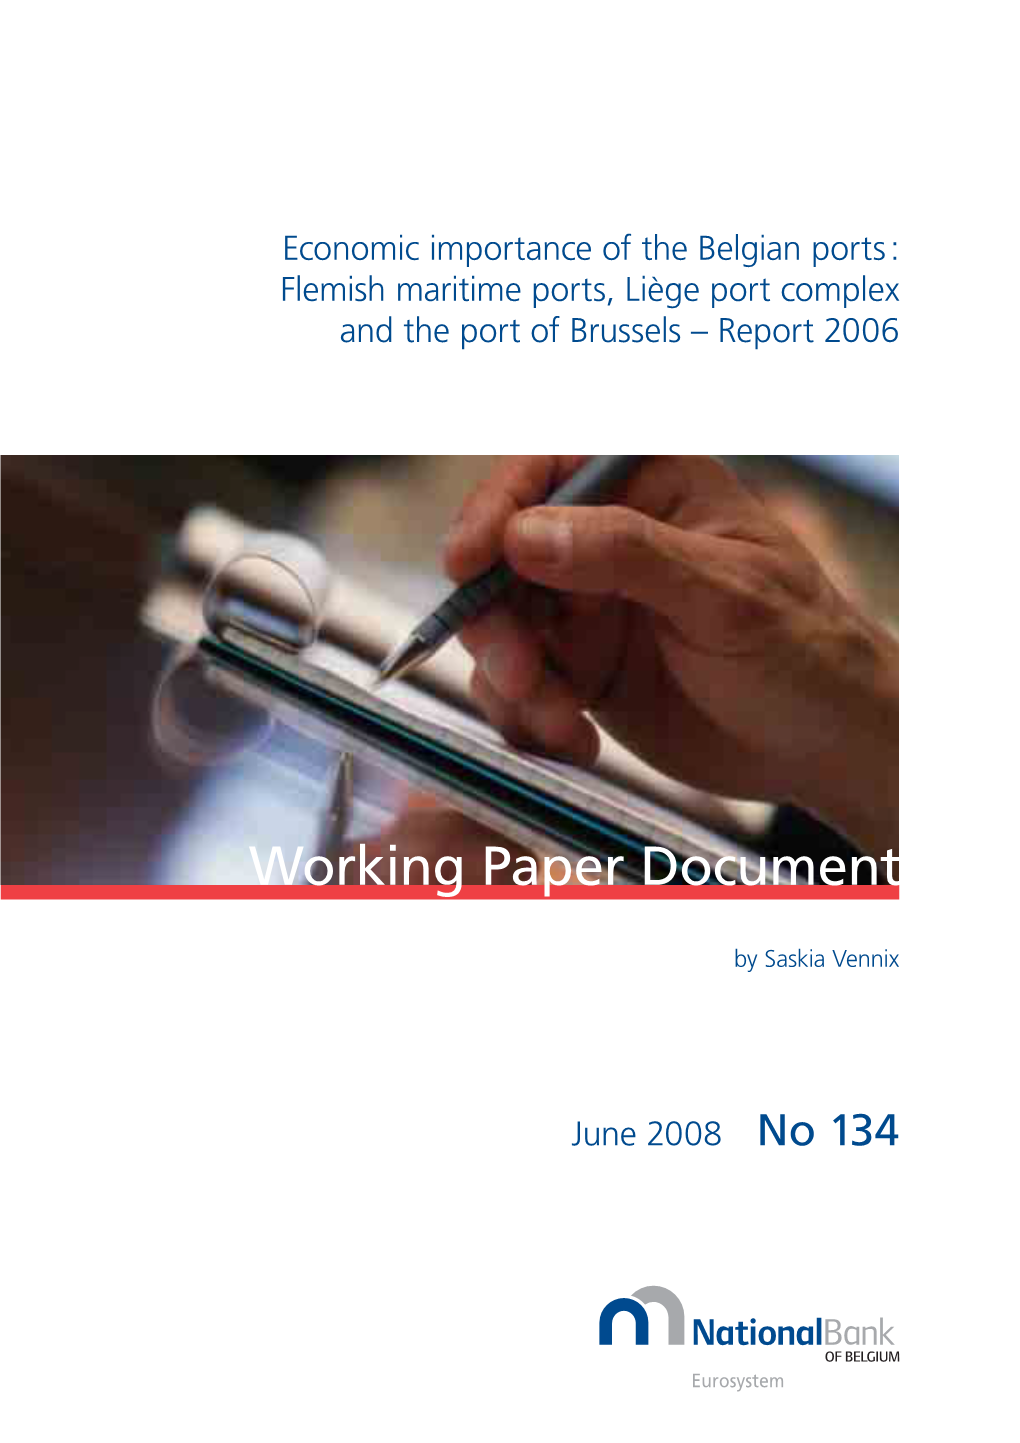 Economic Importance of the Belgian Ports : Flemish Maritime Ports, Liège Port Complex and the Port of Brussels – Report 2006